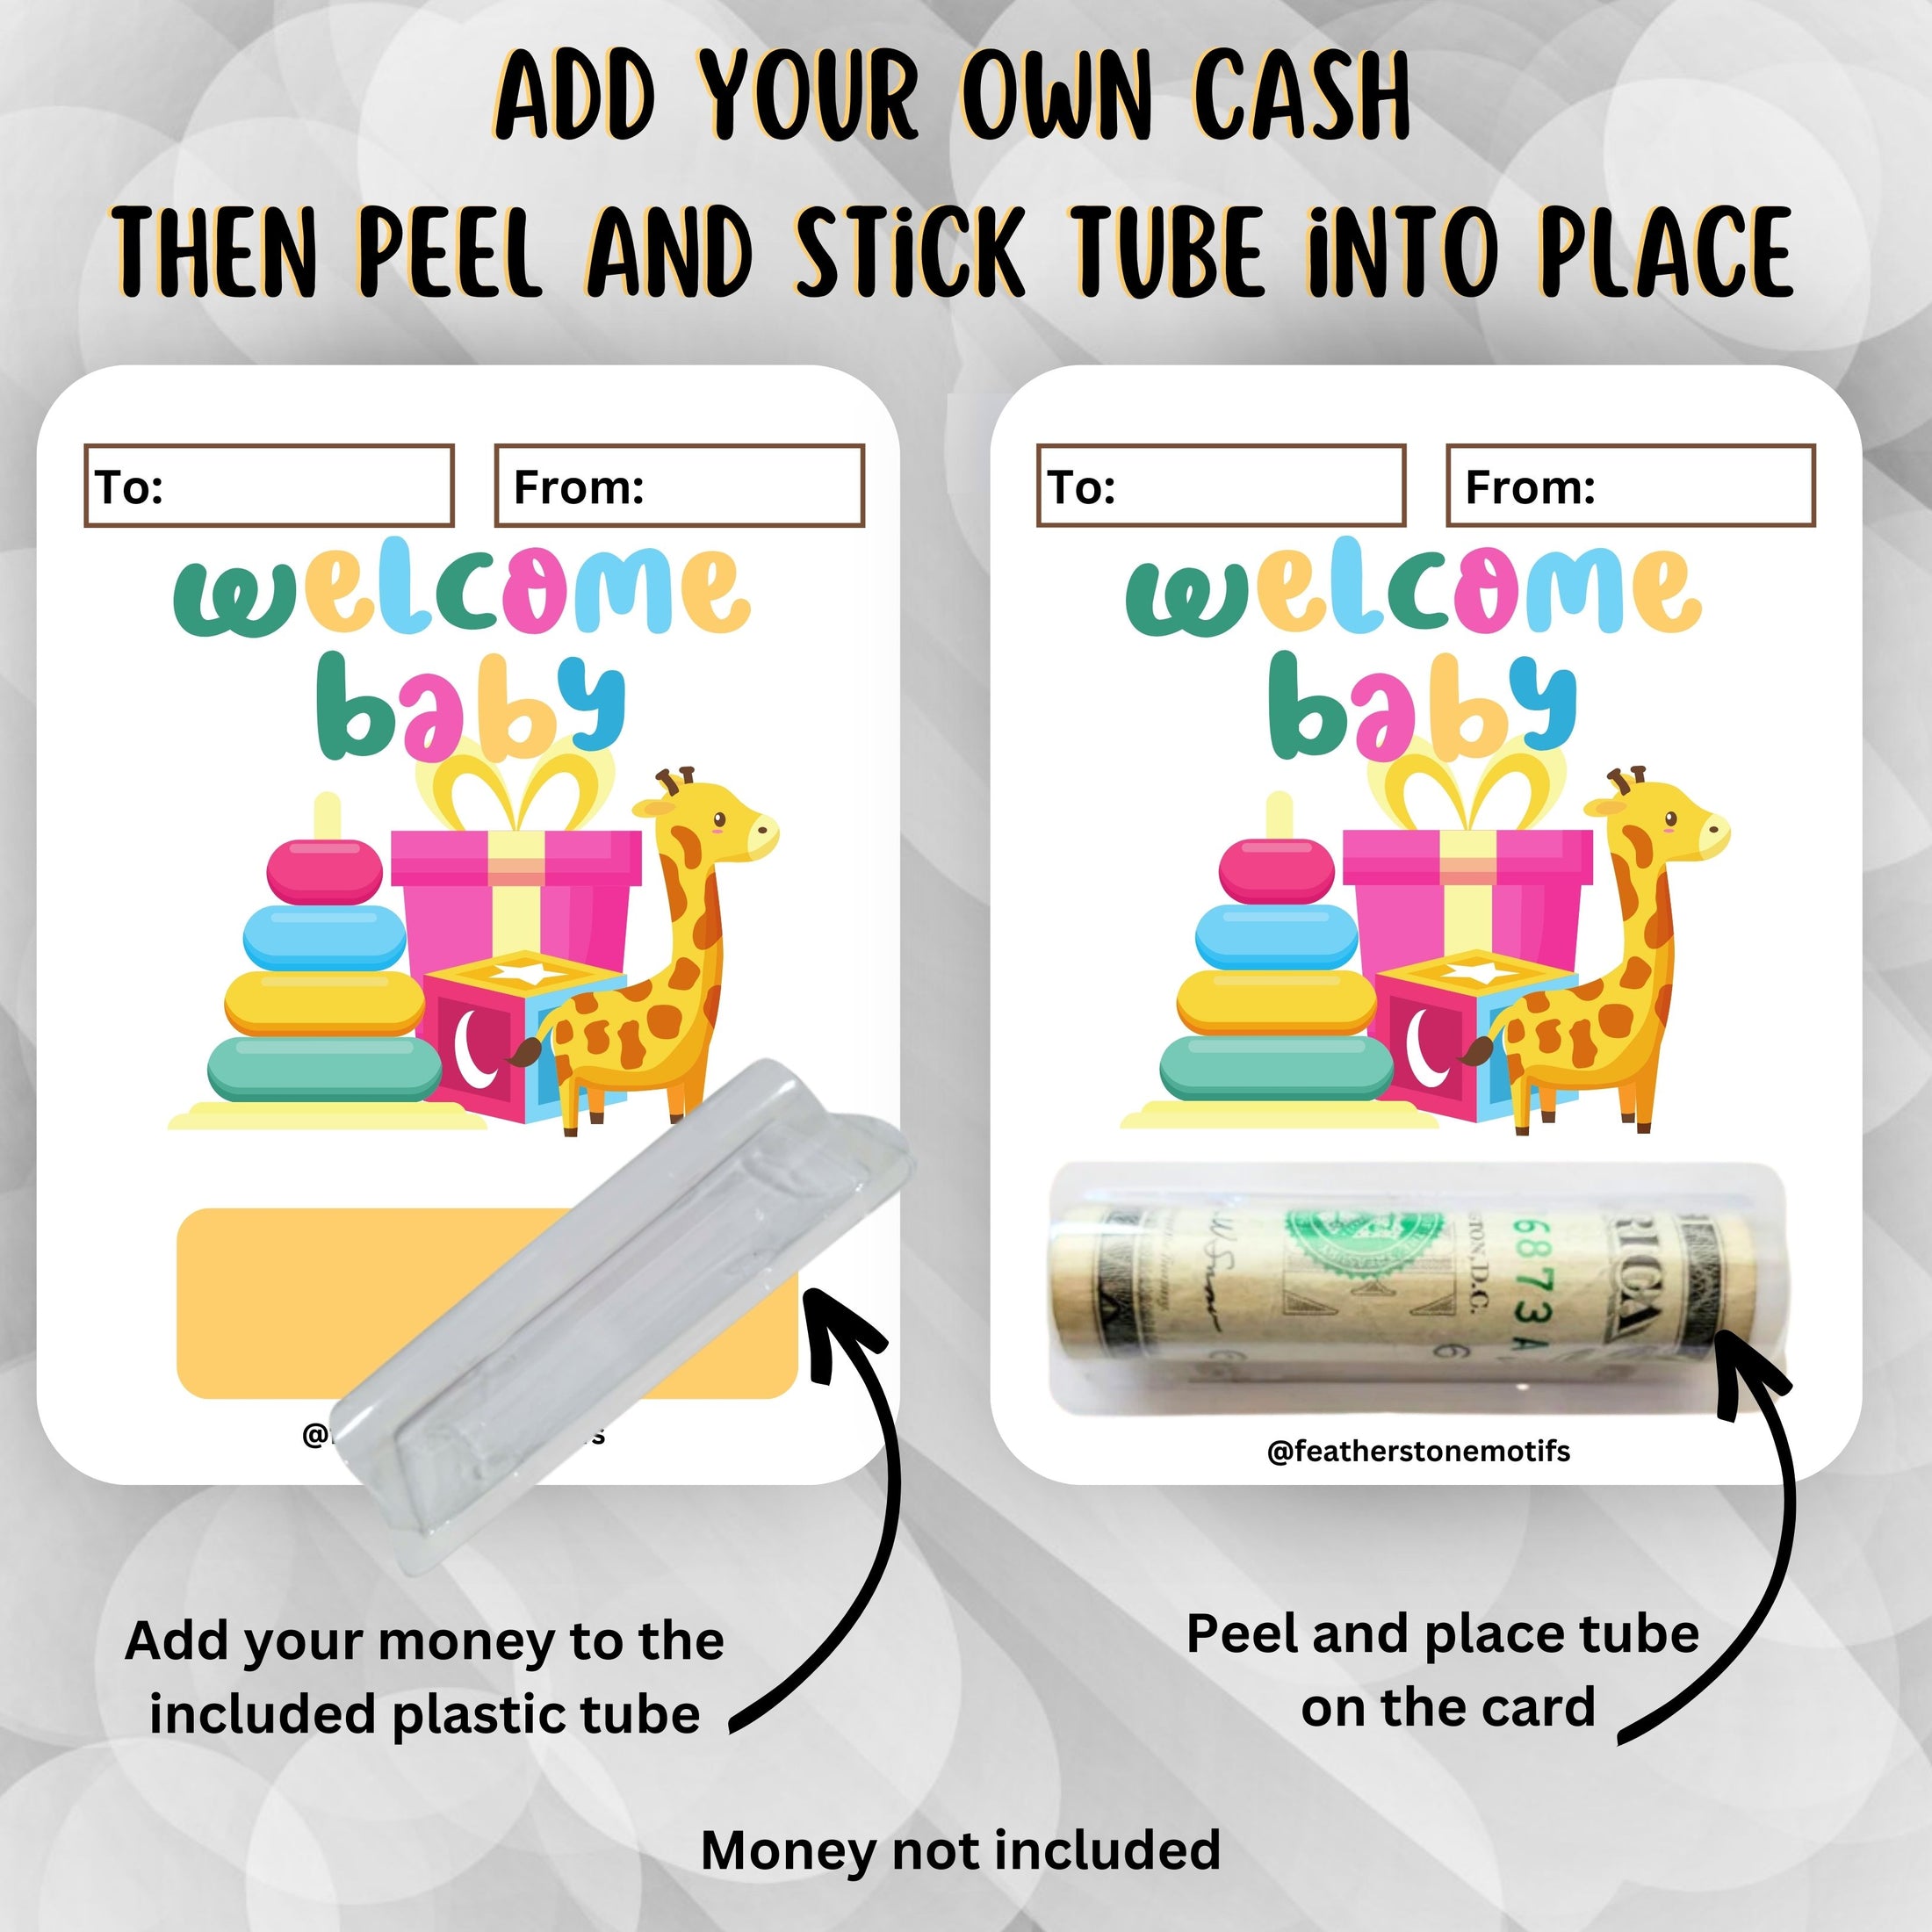 This image shows how to attach the money tube to the Welcome Baby Money Card.